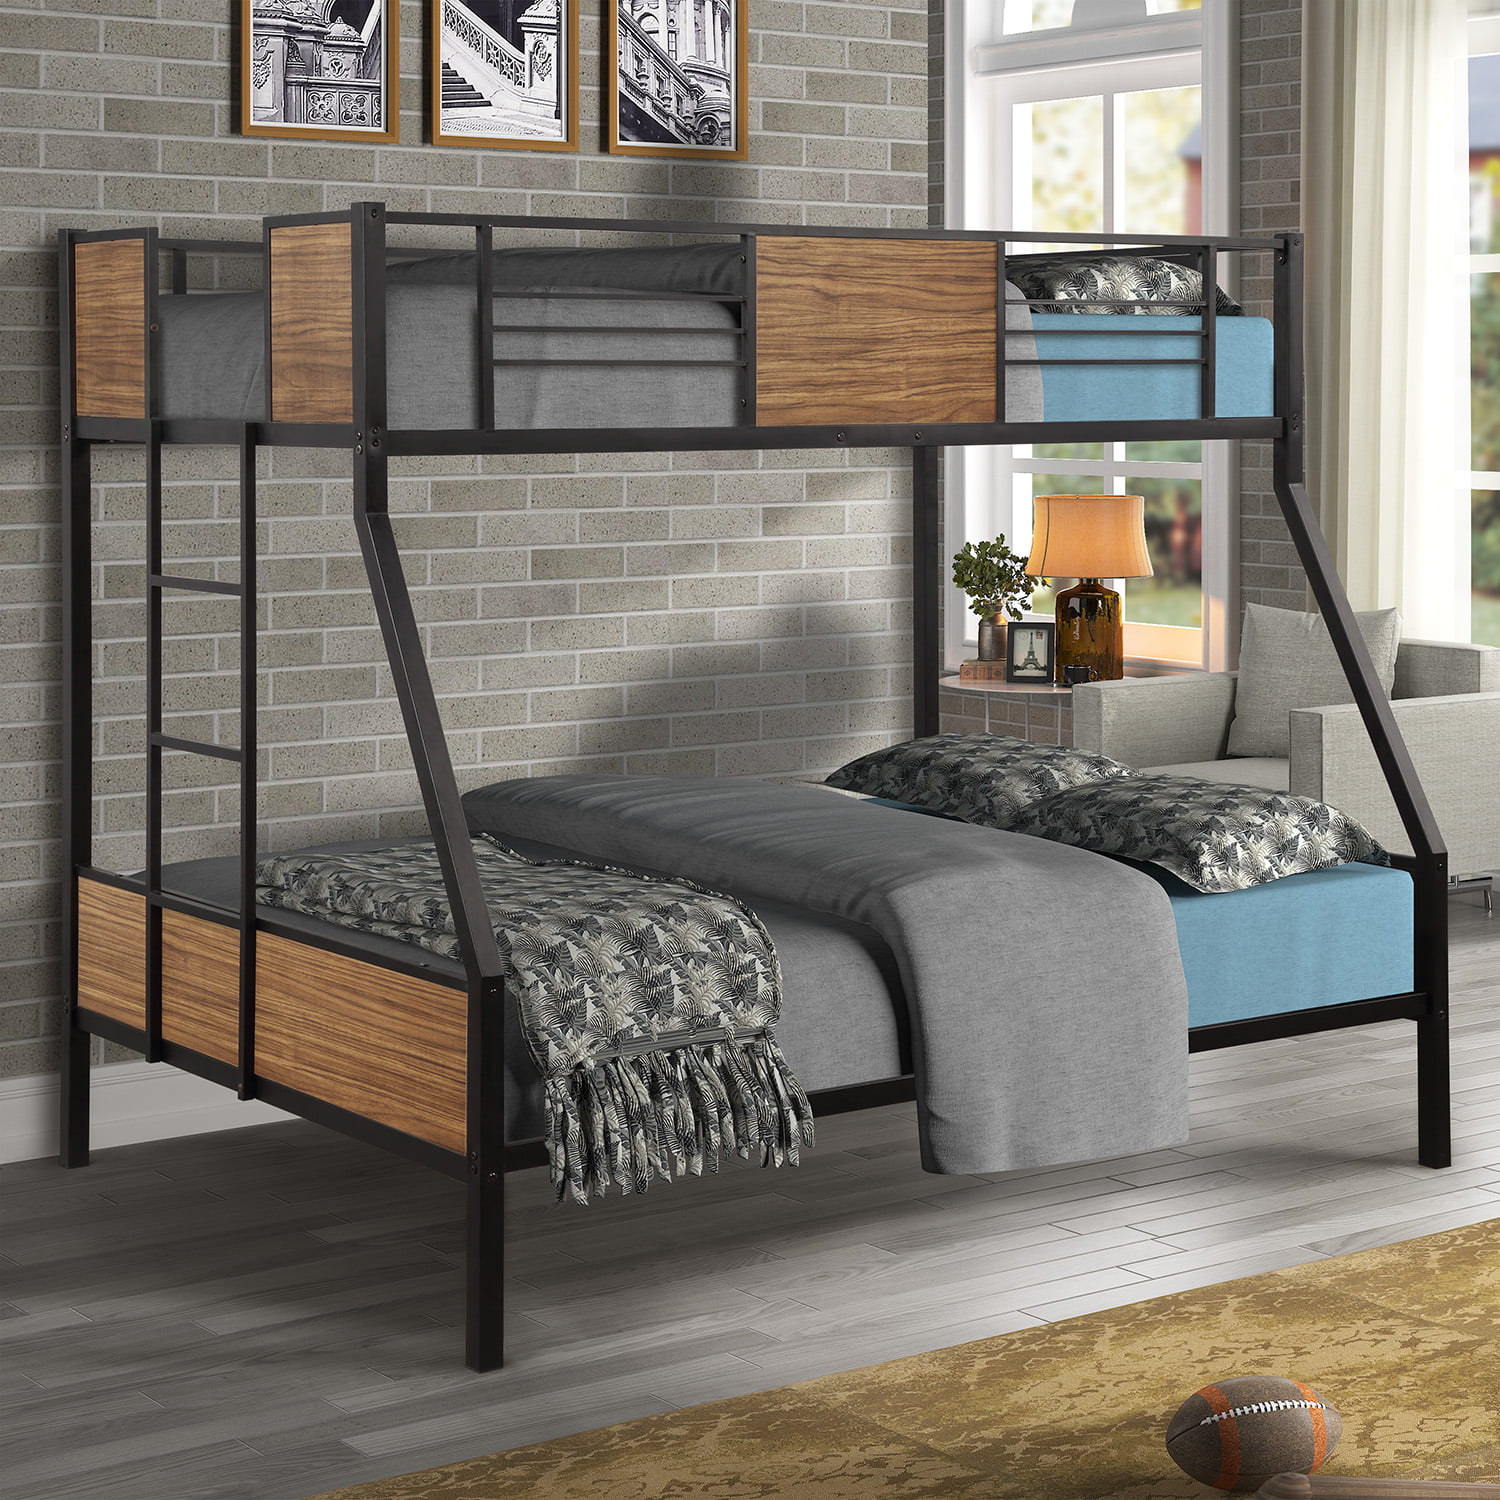 Jumper Twin Over Full Bunk Bed Steel, Bunk Bed Box Spring